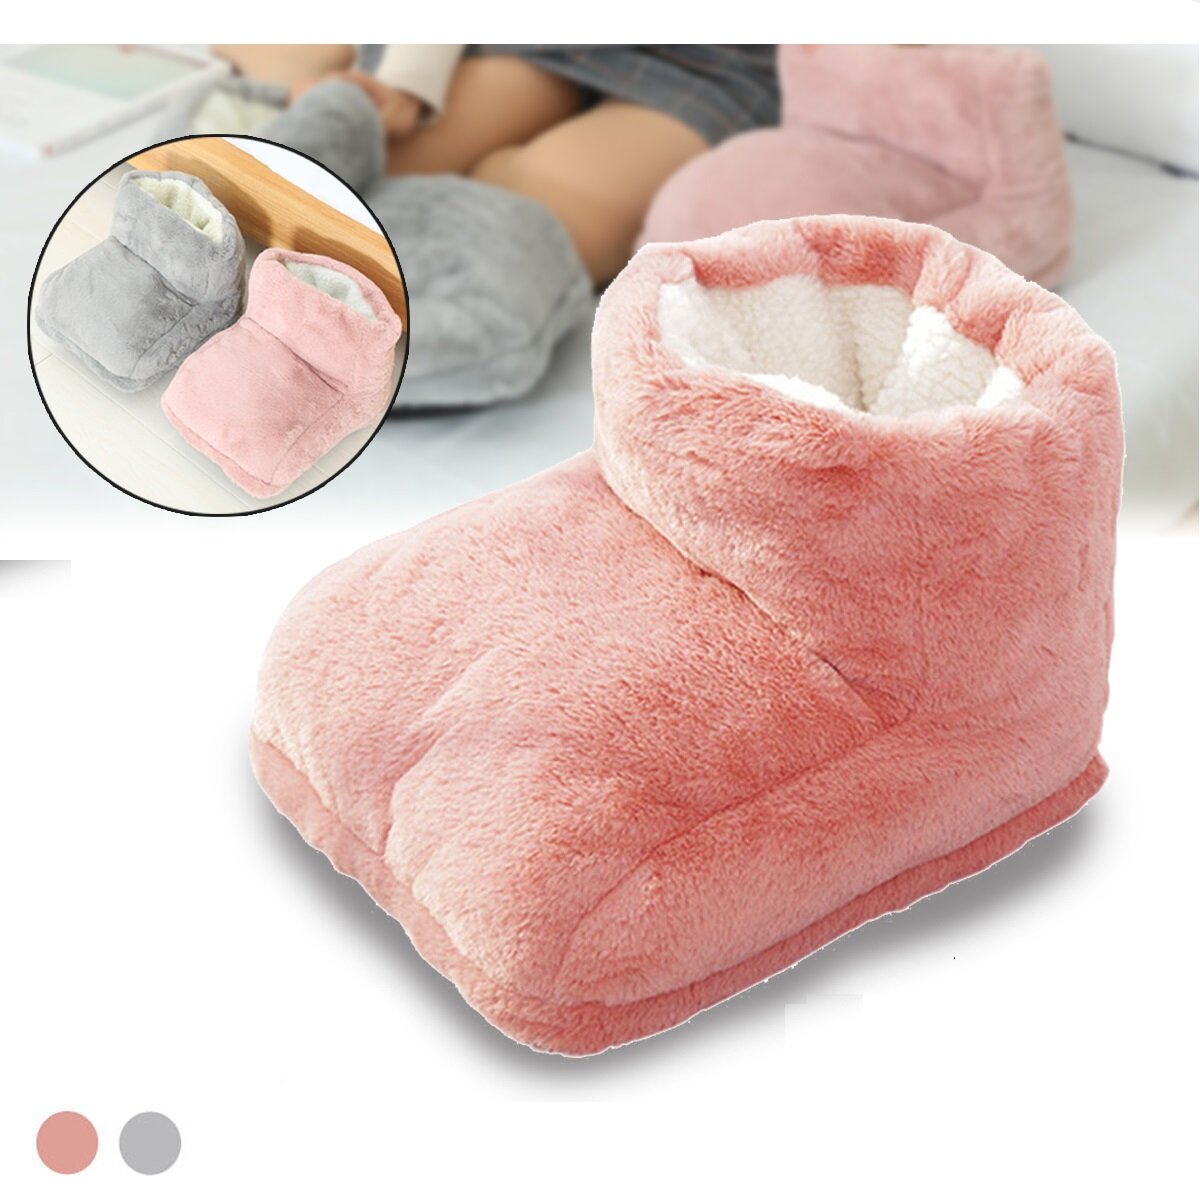 

USB Electric Foot Warmer Built-in Heater Timer Function Power Saving Safe Start Warm Foot Cover Feet Heating Pad